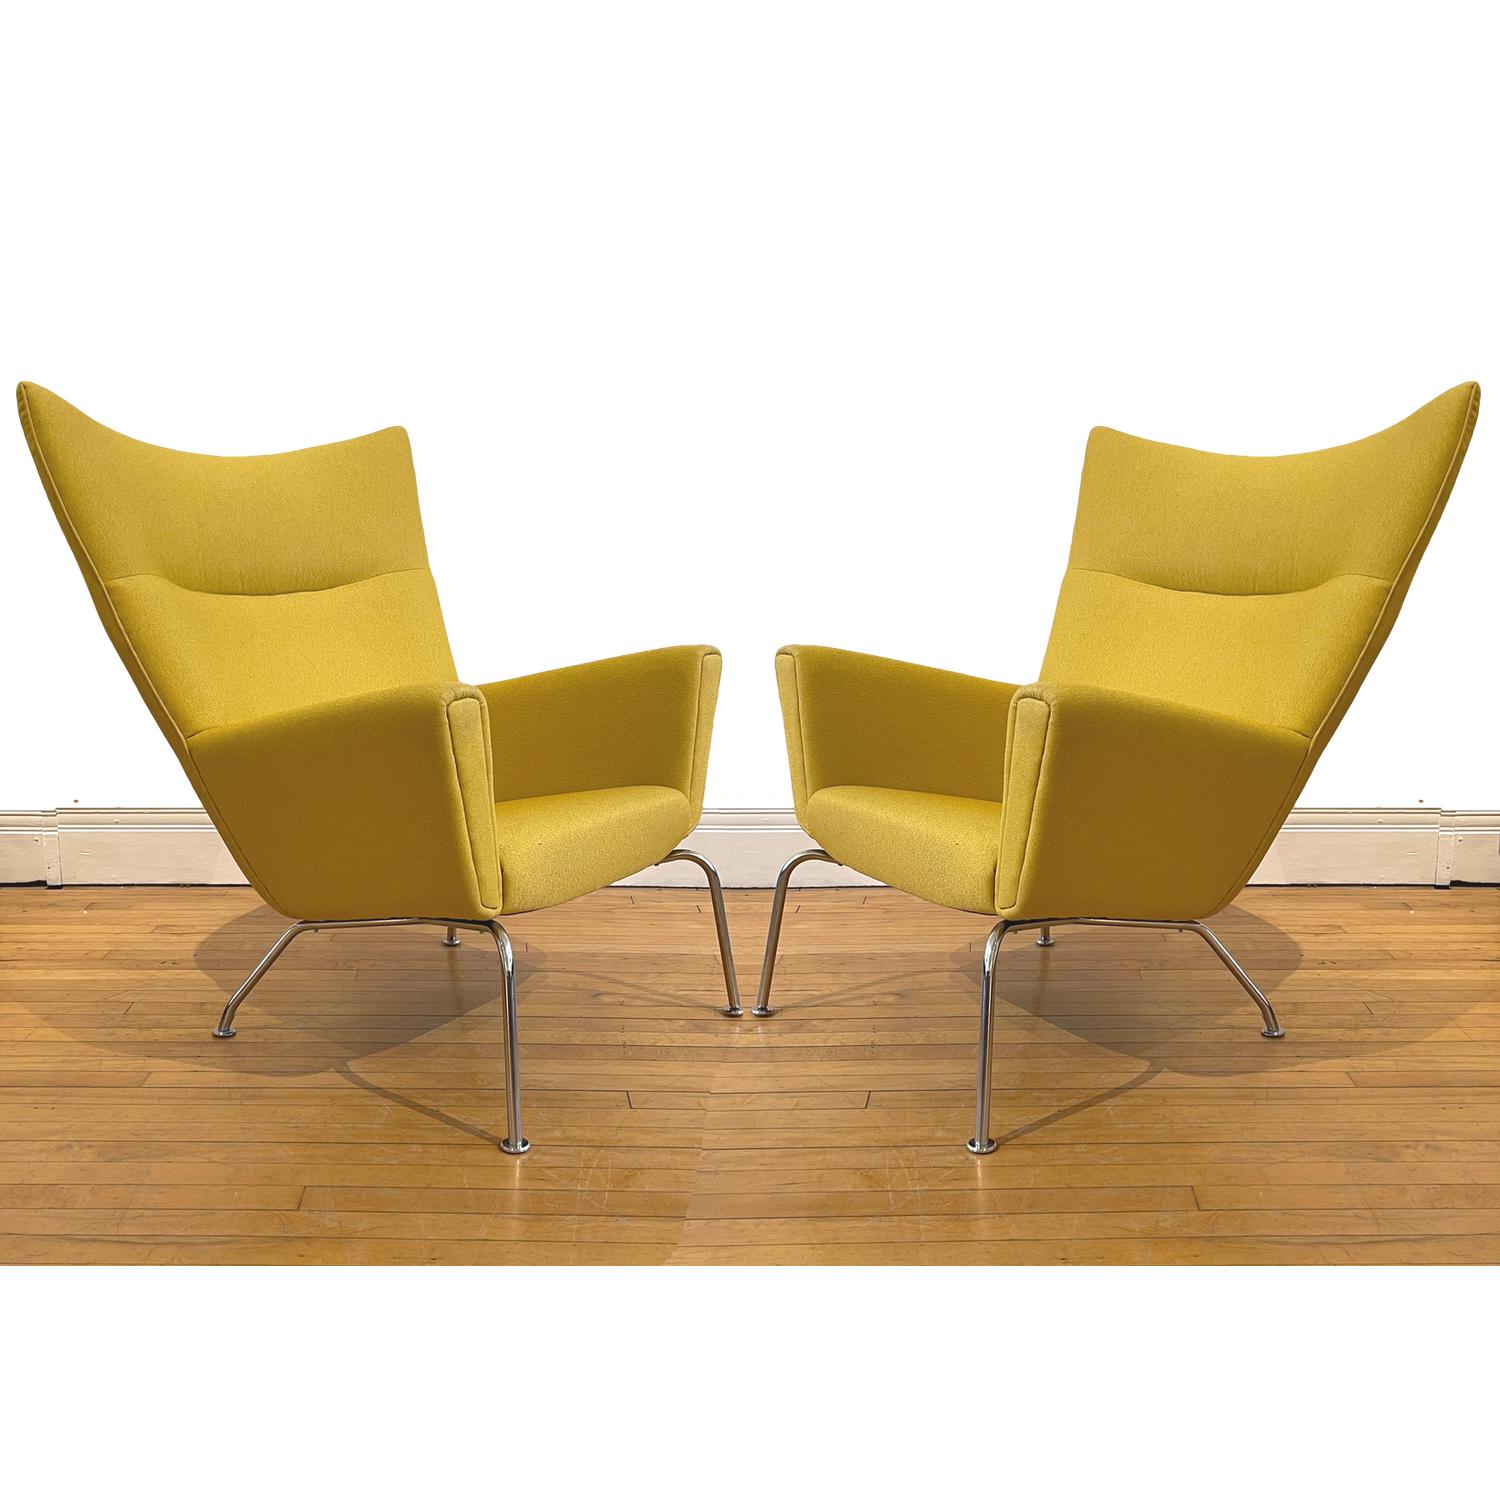 Priced per chair. Four available in yellow

The Wegner Wing Chair was born in 1960 with a simple scetch by Danish design legend Hans J. Wegner. Now, Carl Hansen & Son has dusted off the drawings to bring this contemporary classic back to life. The